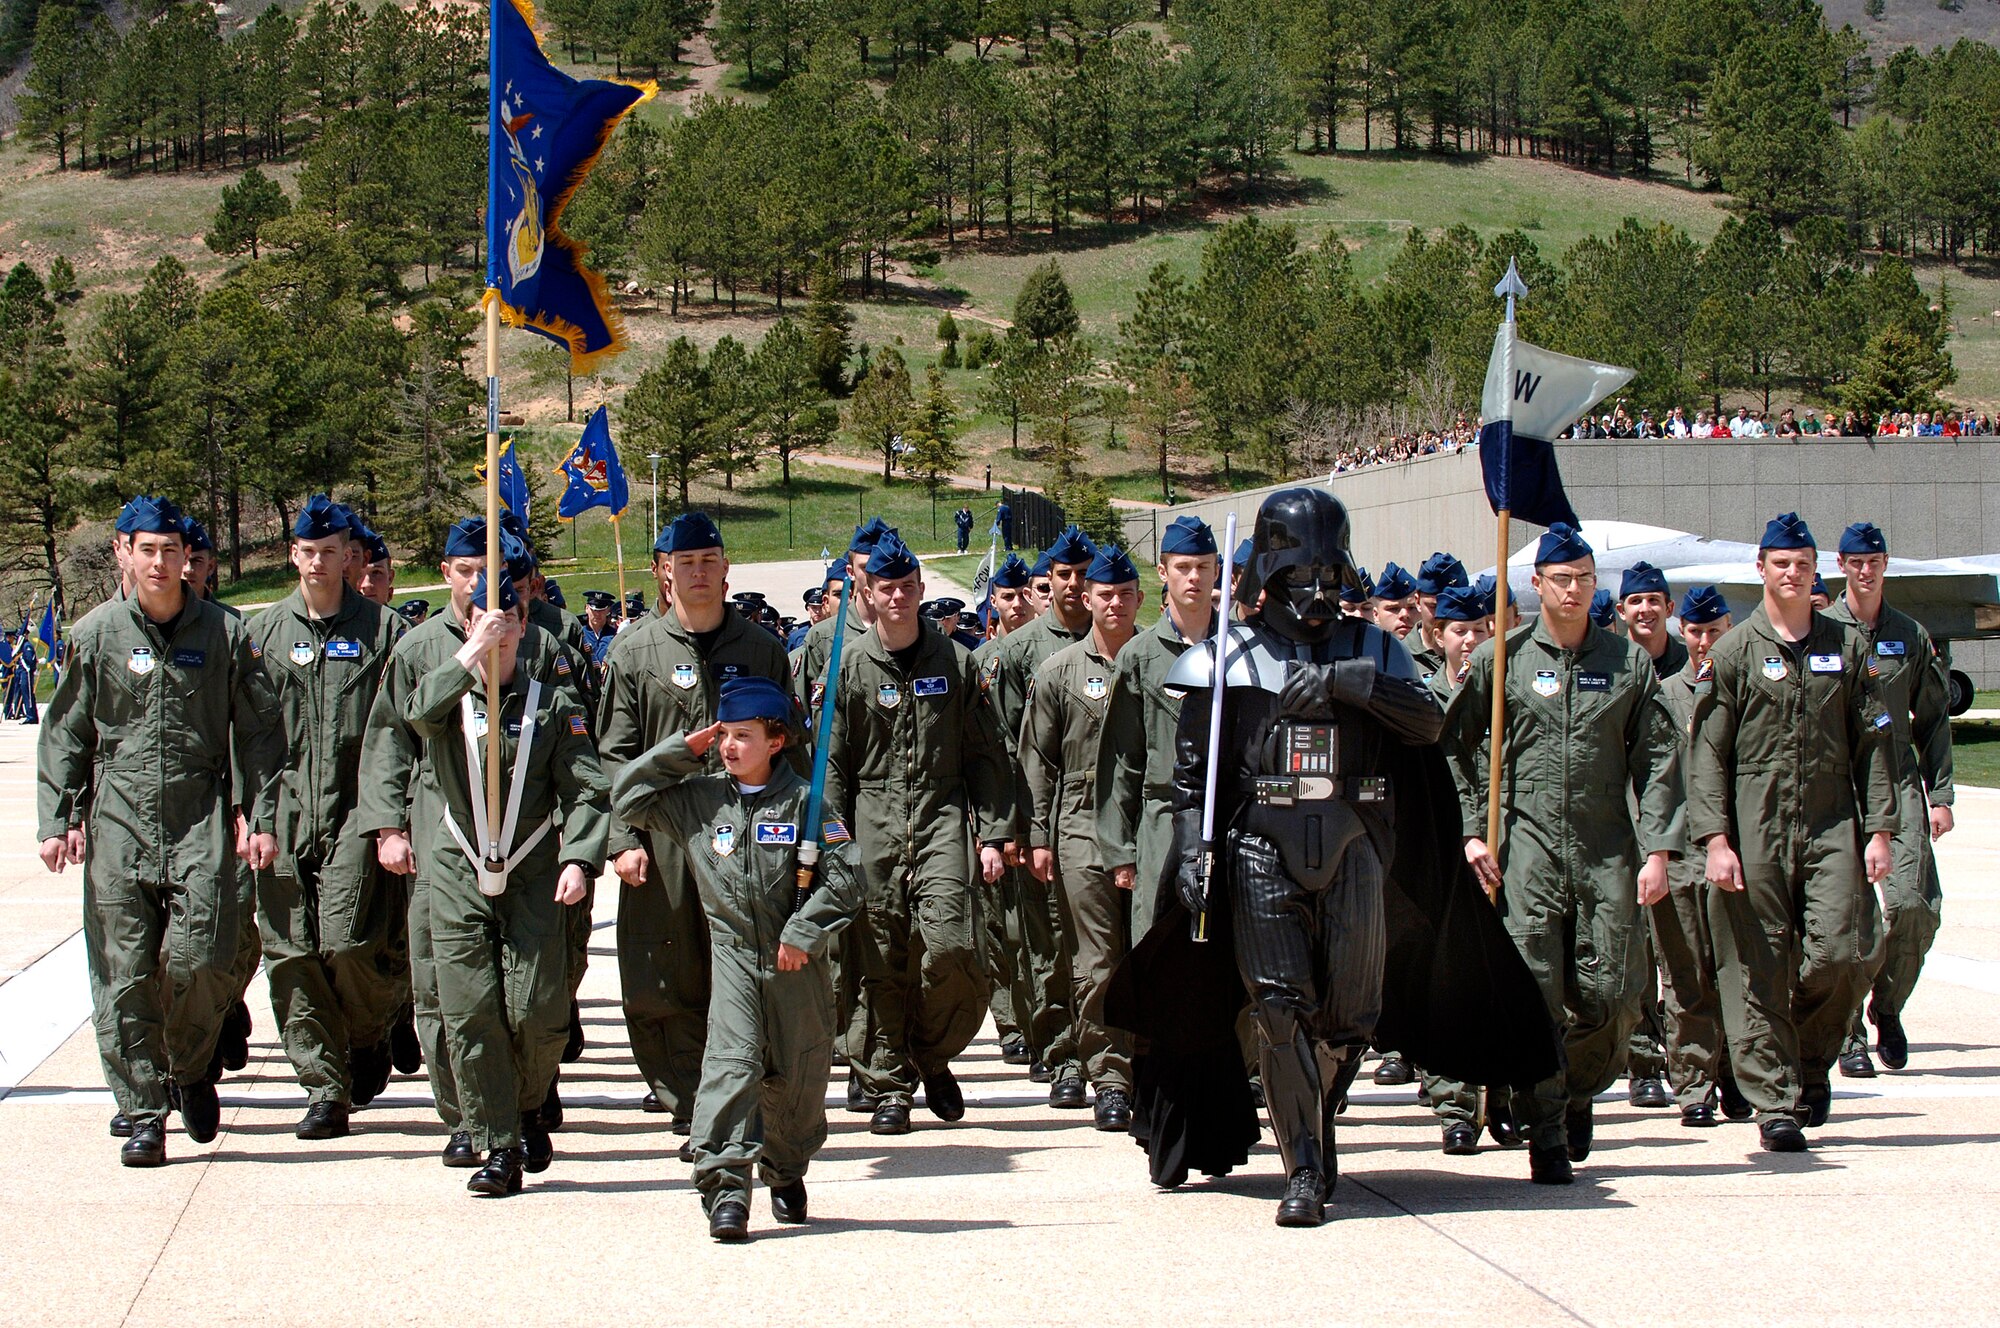 Ten-year-old Julian Willis leads cadet squadron 39 during the lunchtime formation at the U.S. Air Force Academy, Colo. The Make-a-Wish Foundation and the Air Force Academy made Julian a "Cadet for a Day".  Cadets donate money for the program and have sponsored 22 children since it started in 2000. (USAF Photo by Mike Kaplan)